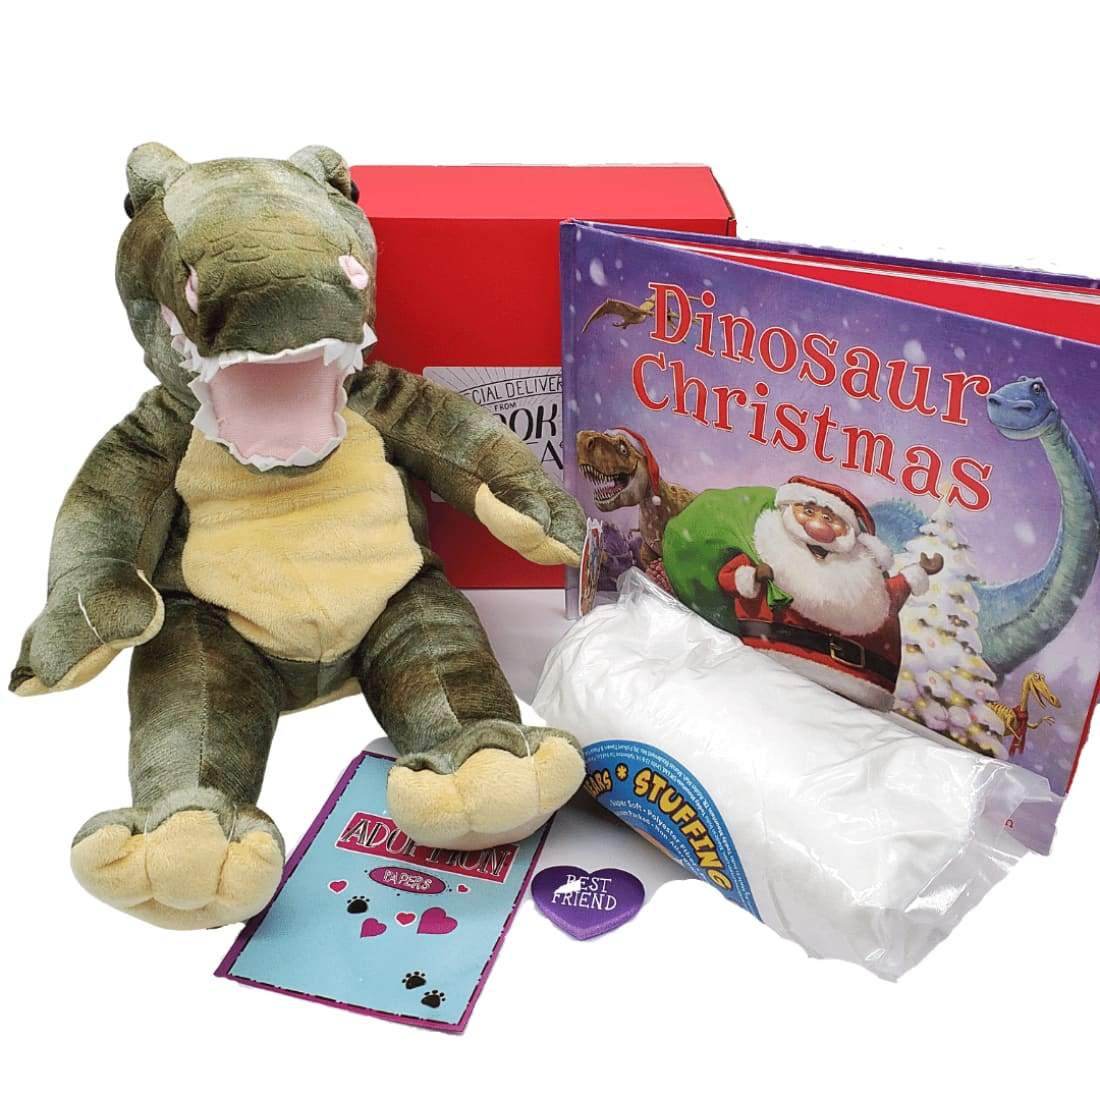 Christmas Dinosaur Book and Bear Box with a Dinosaur to easily build yourself, a picture book, and a Christmas gift surprise. Shown outside box with white background.